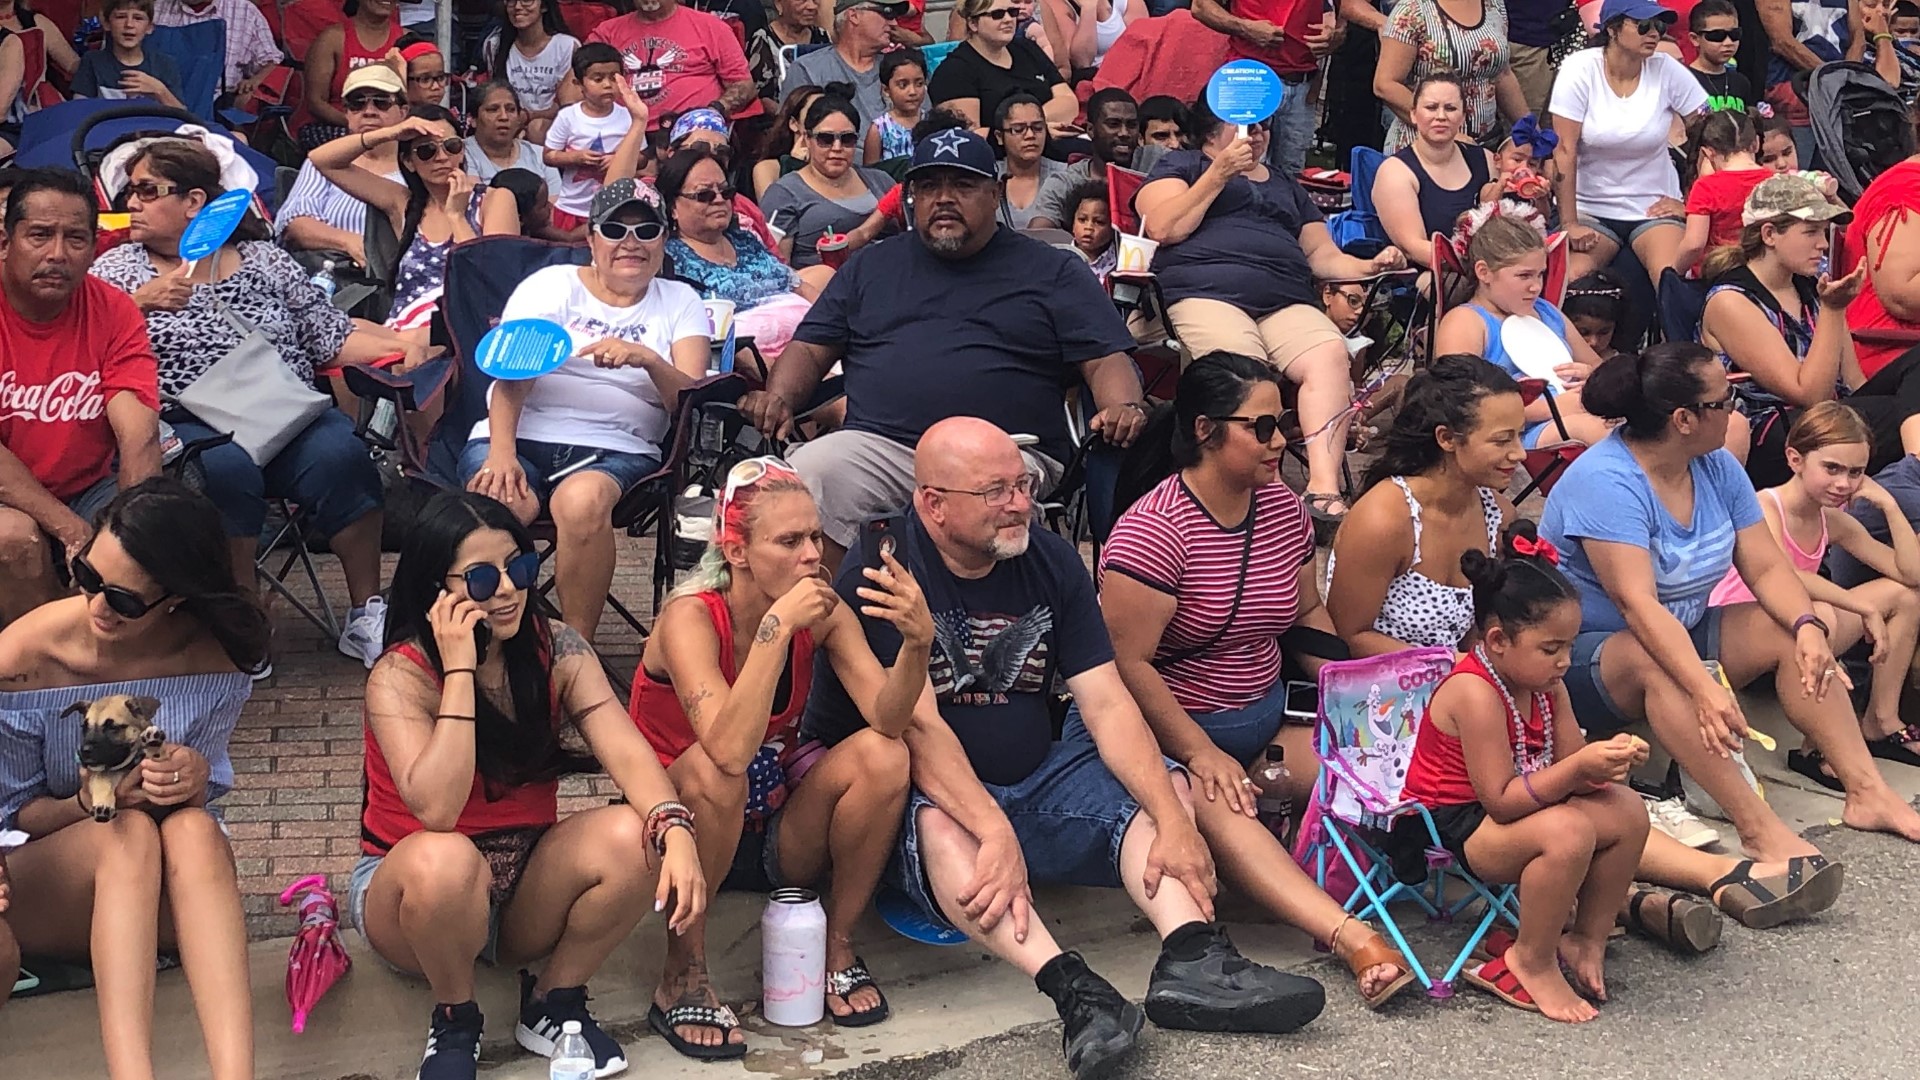 Thousands turn out for the Belton July 4th parade